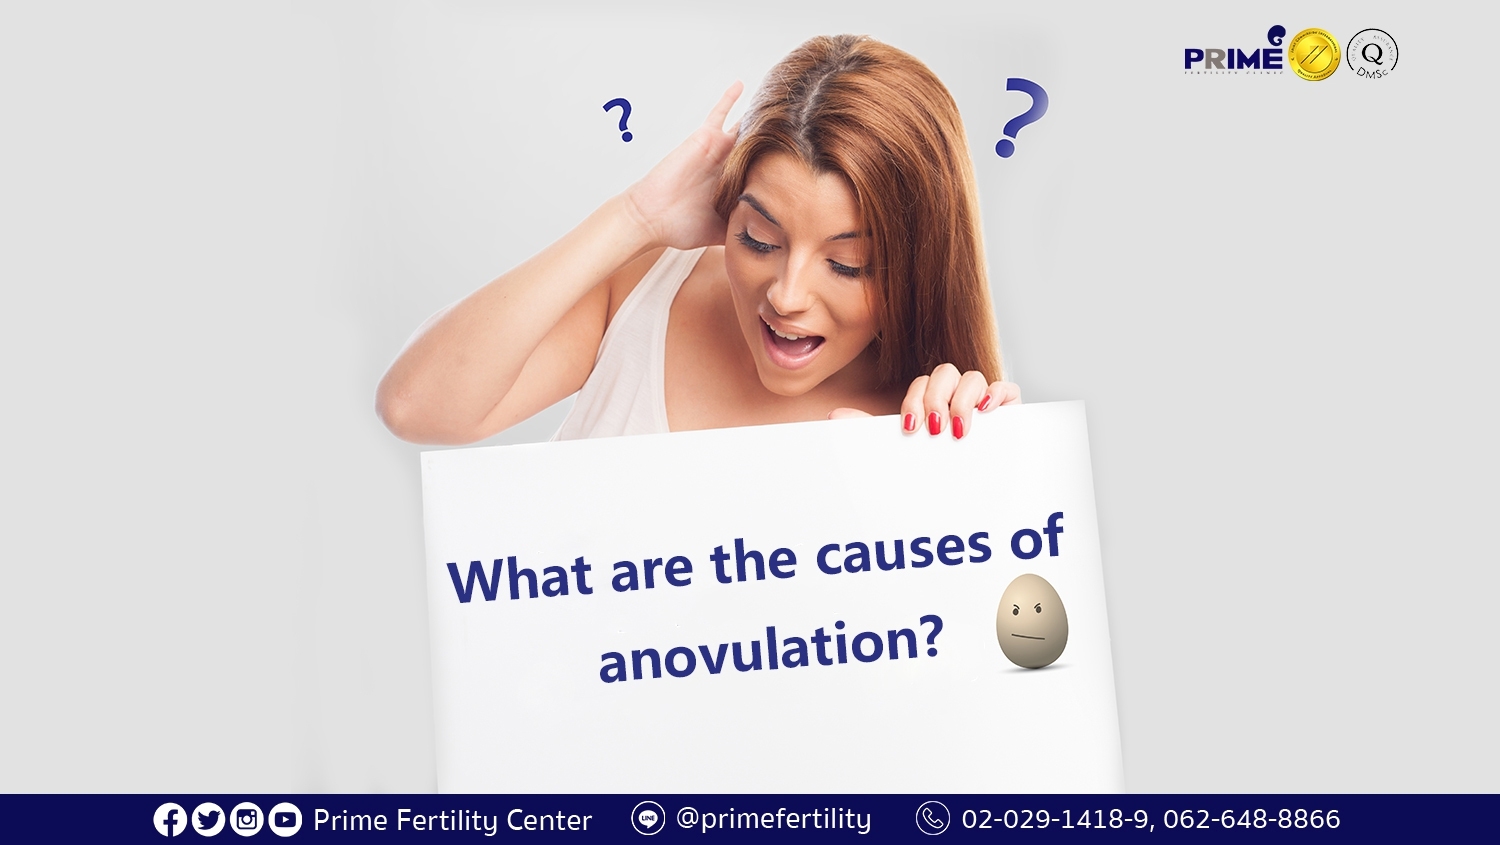 What are the causes of anovulation?